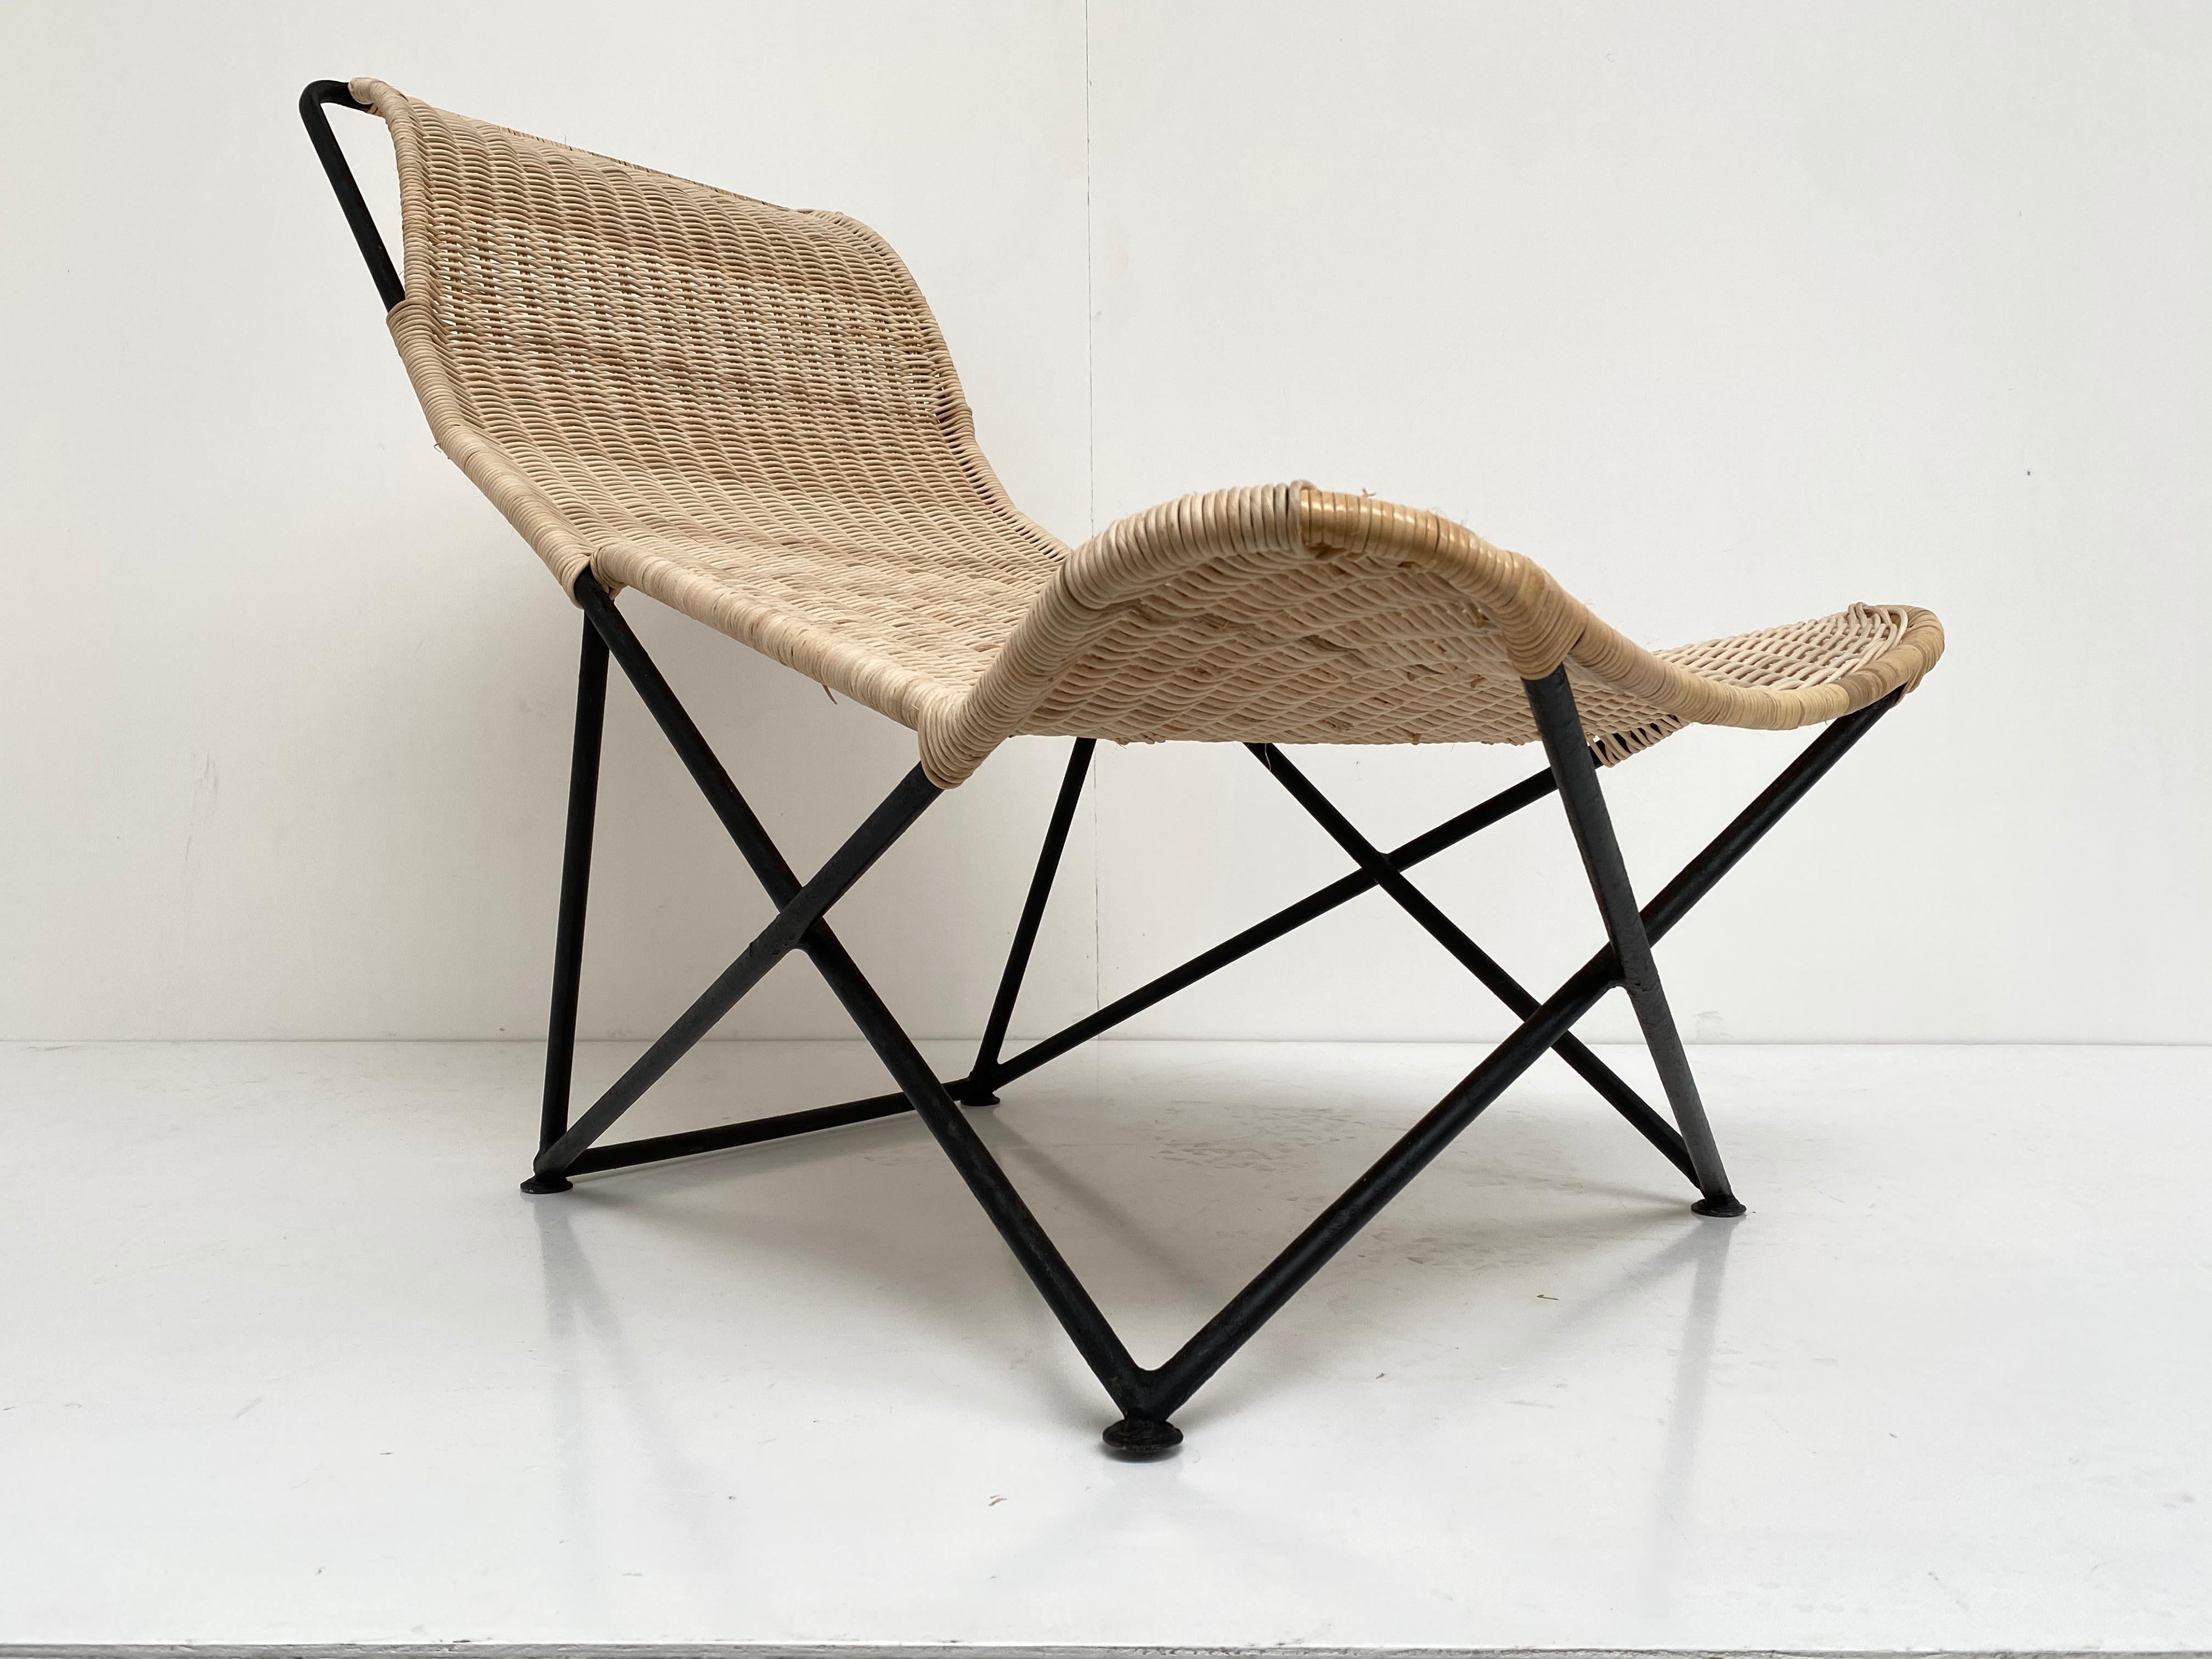 Stunning French 1950s sculptural form wicker chaise. This chaise has the wonderful juxtaposition of a free form organic flowing organic wicker element mounted on a Minimalist triangulated enameled steel frame adding to the overall lightness and